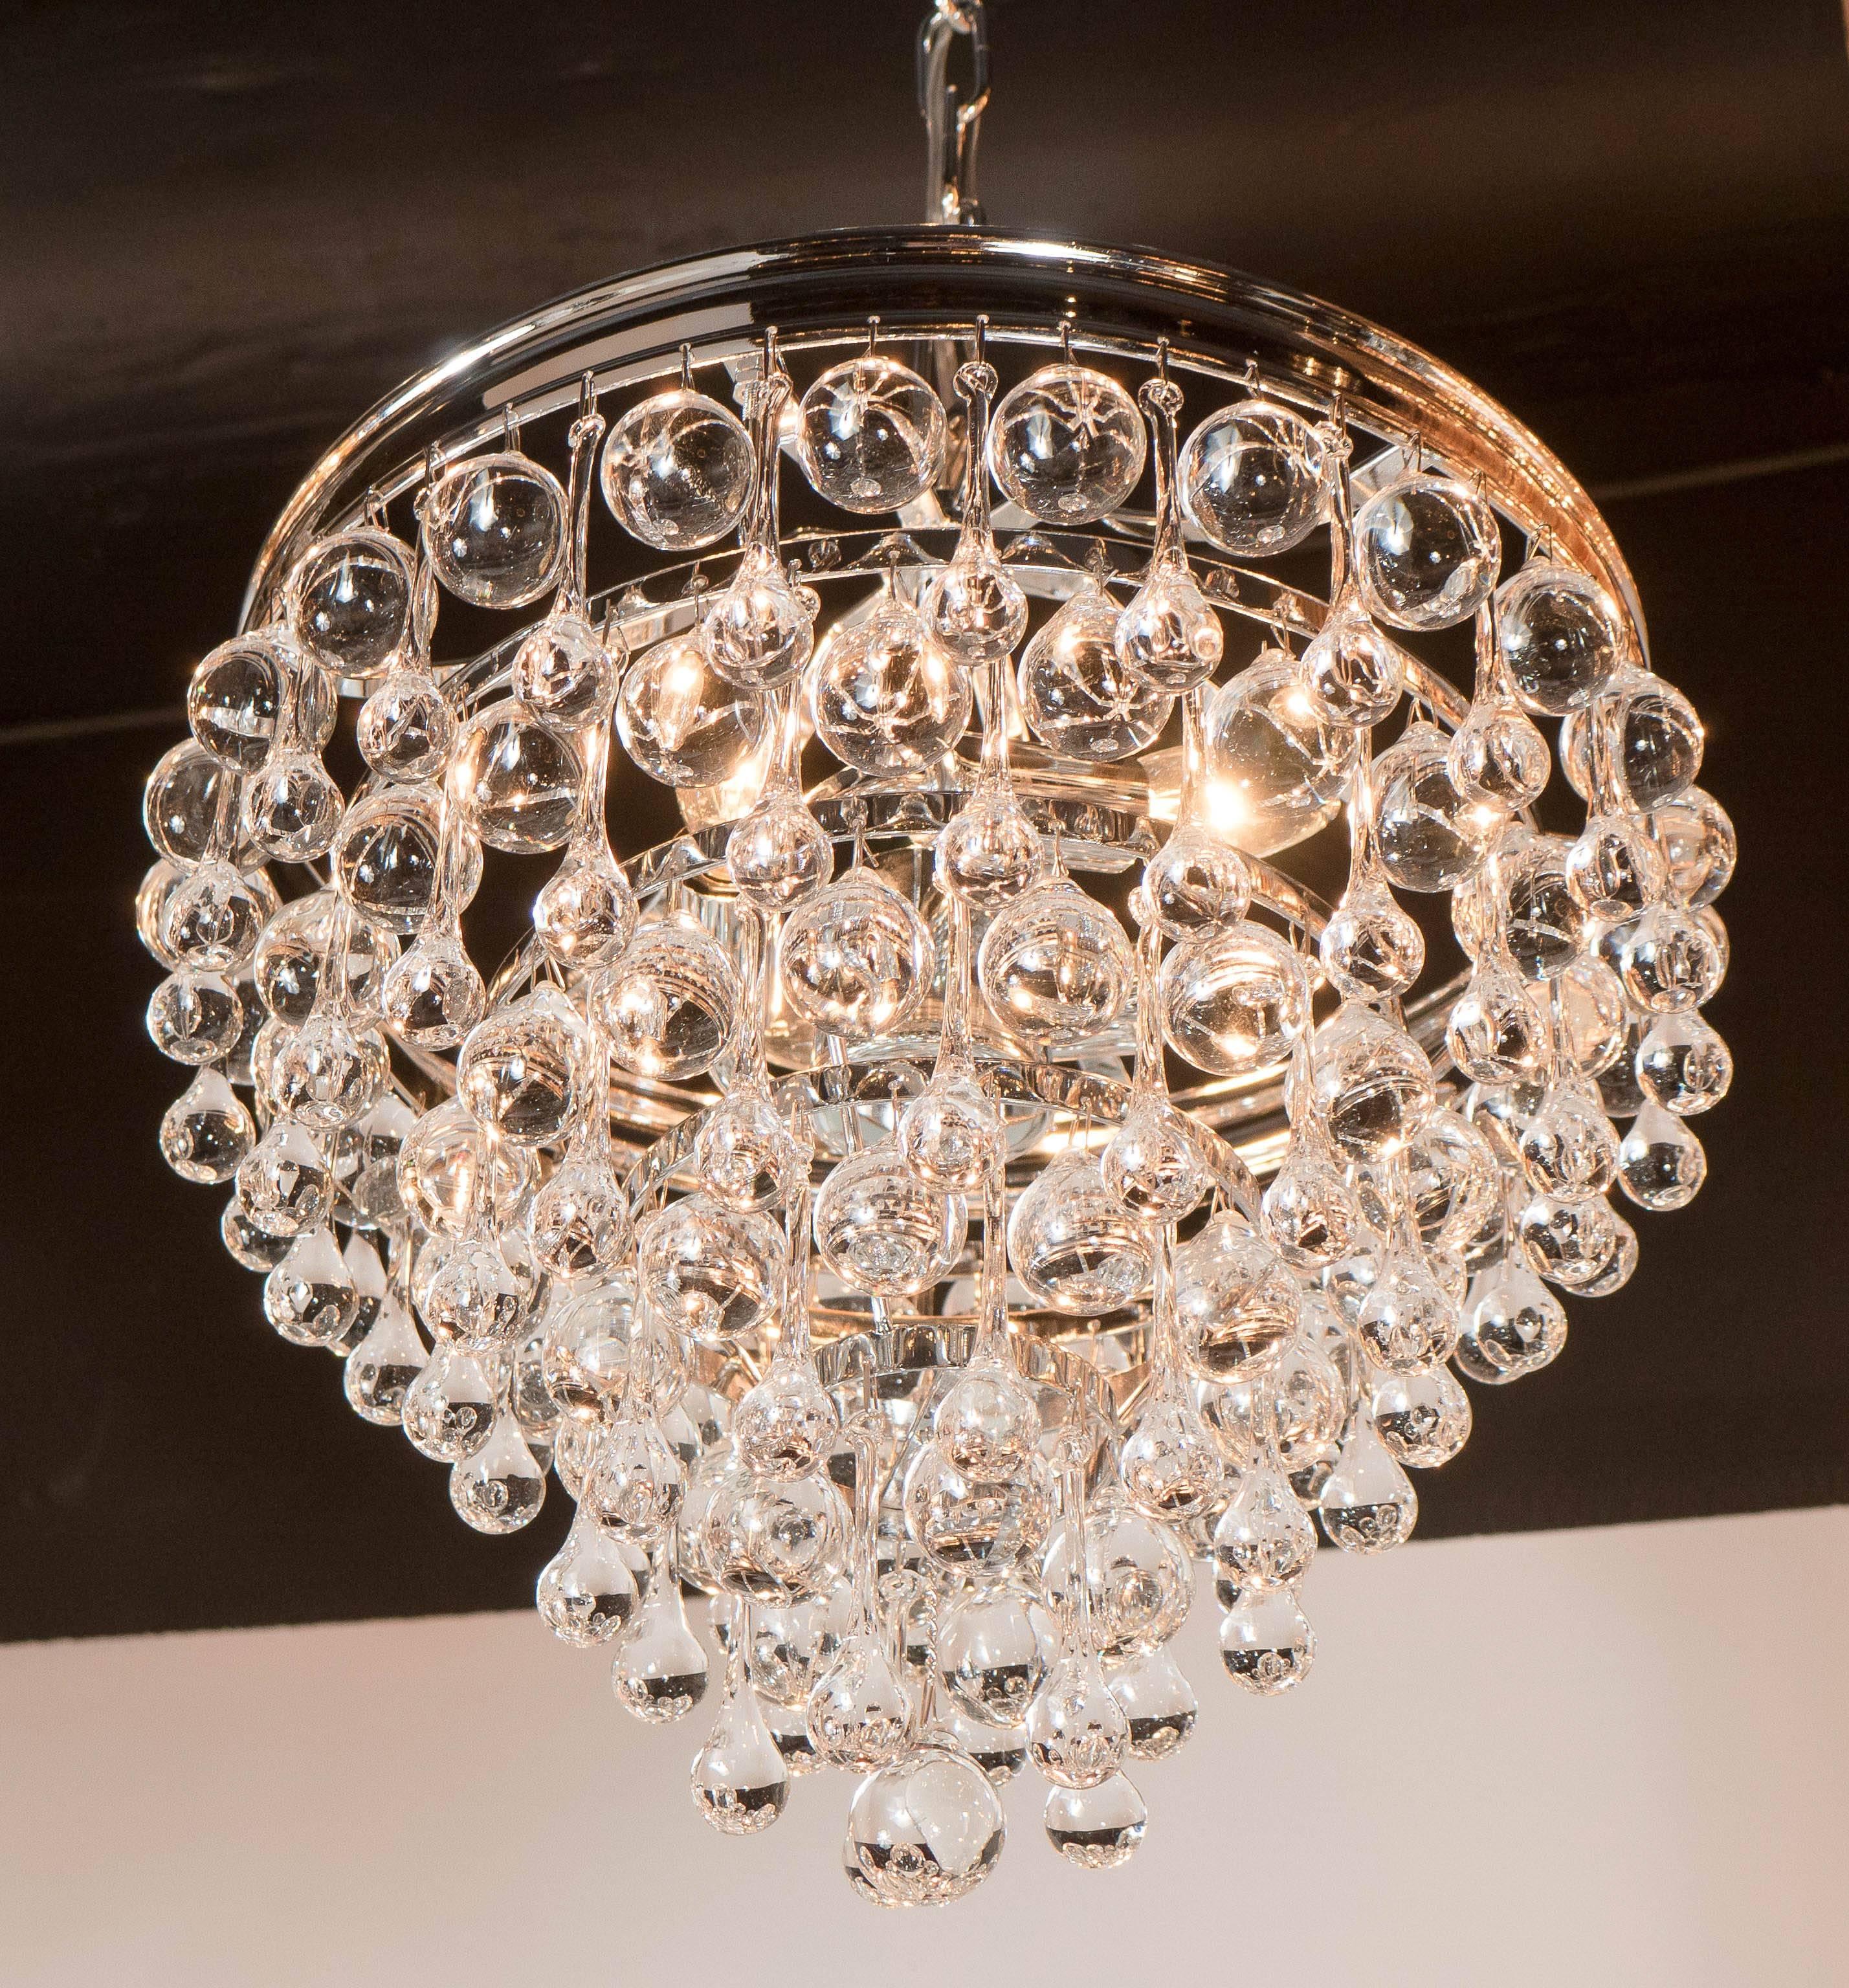 An elegant flush mount chandelier with contrasting crystal ball and teardrop glass segments in a radial pattern. The result is a very sparkling effect typical of Hollywood style and glamour. The fixture is nickel and the glass is handblown.